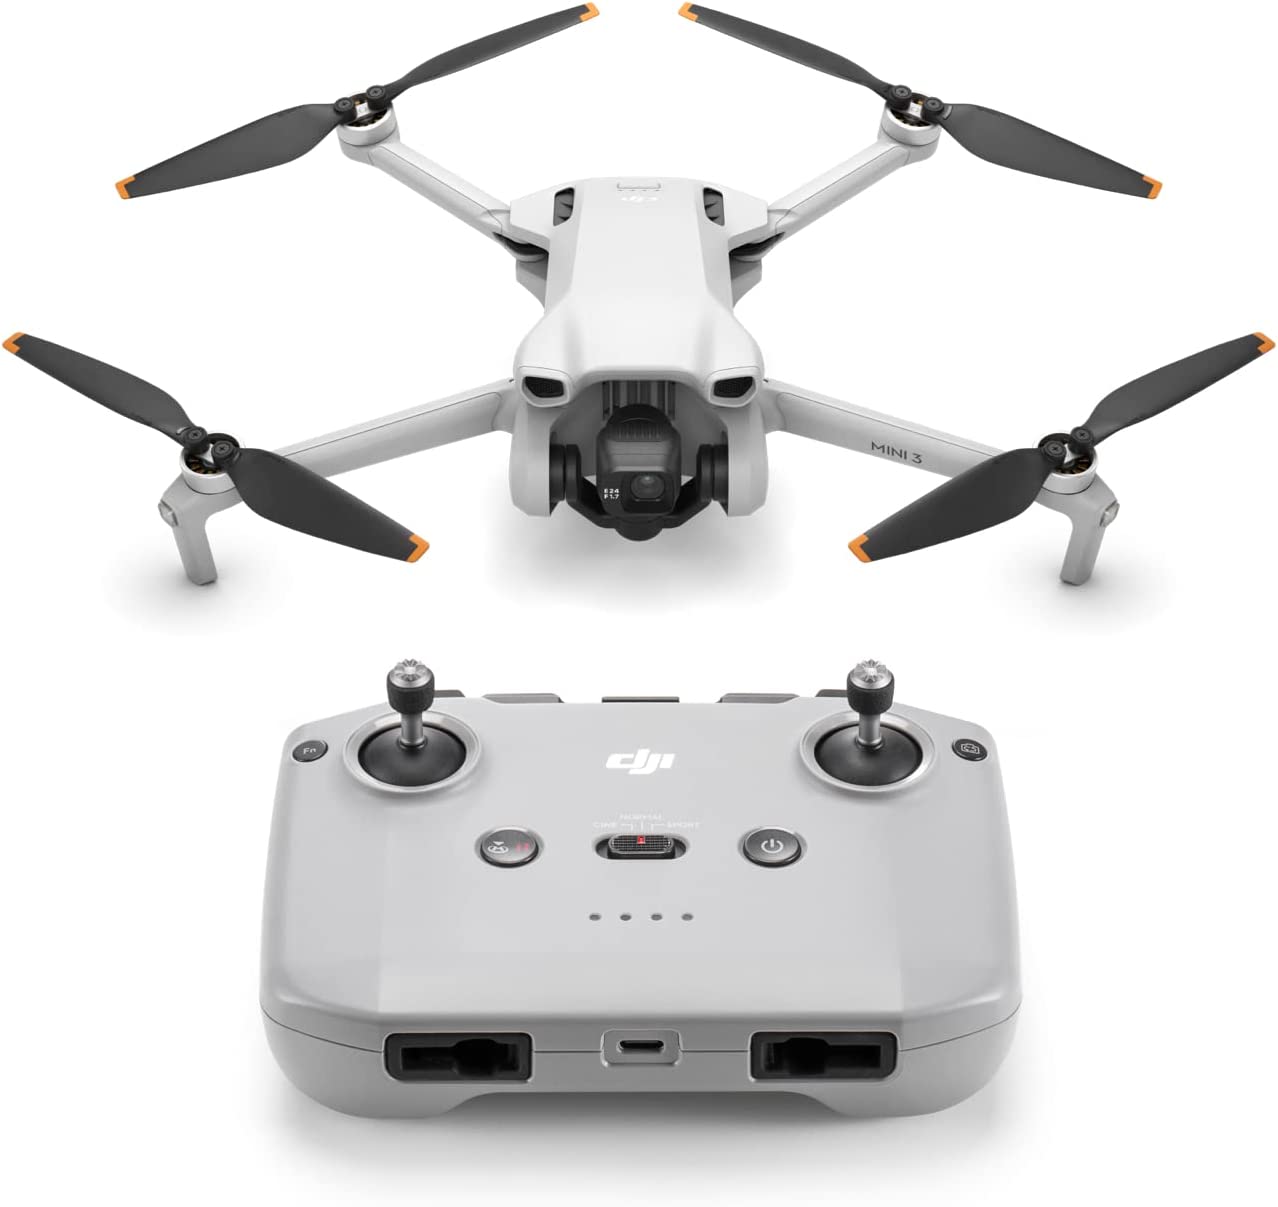 DJI Mini 3 Drone On Sale for $90 Off [Lowest Price Ever]